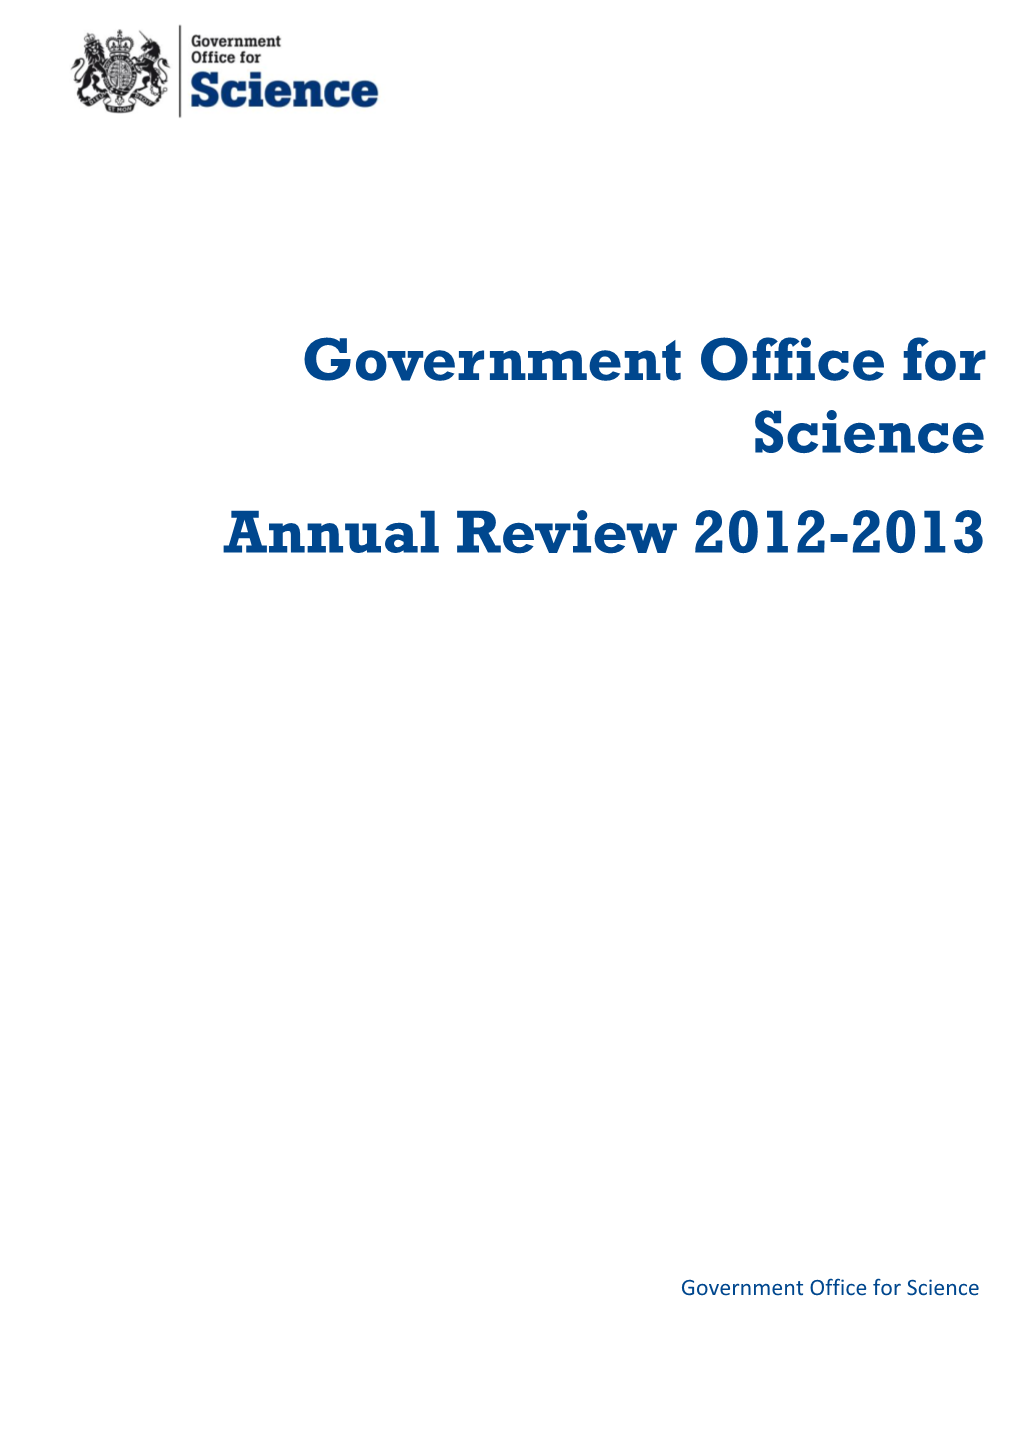 Government Office for Science Annual Review 2012/2013